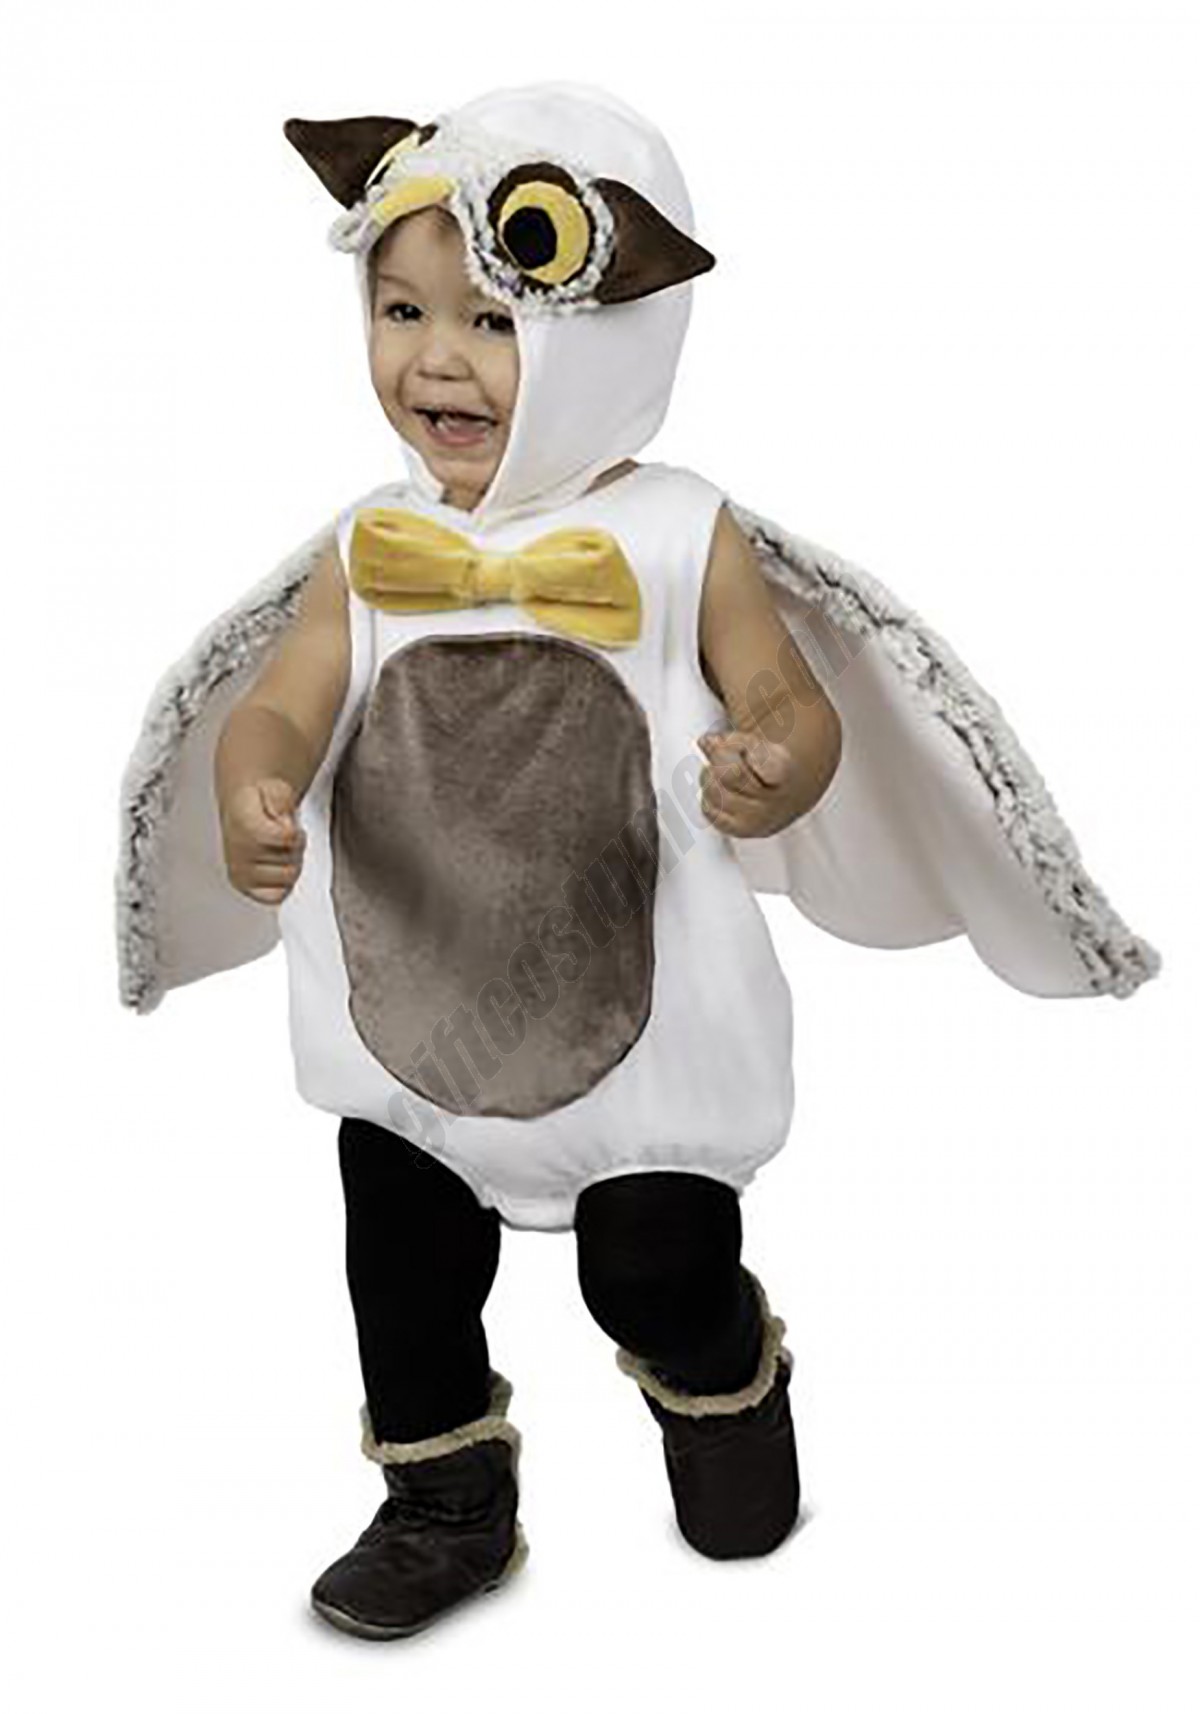 Otis the Owl Costume for Toddlers Promotions - -0